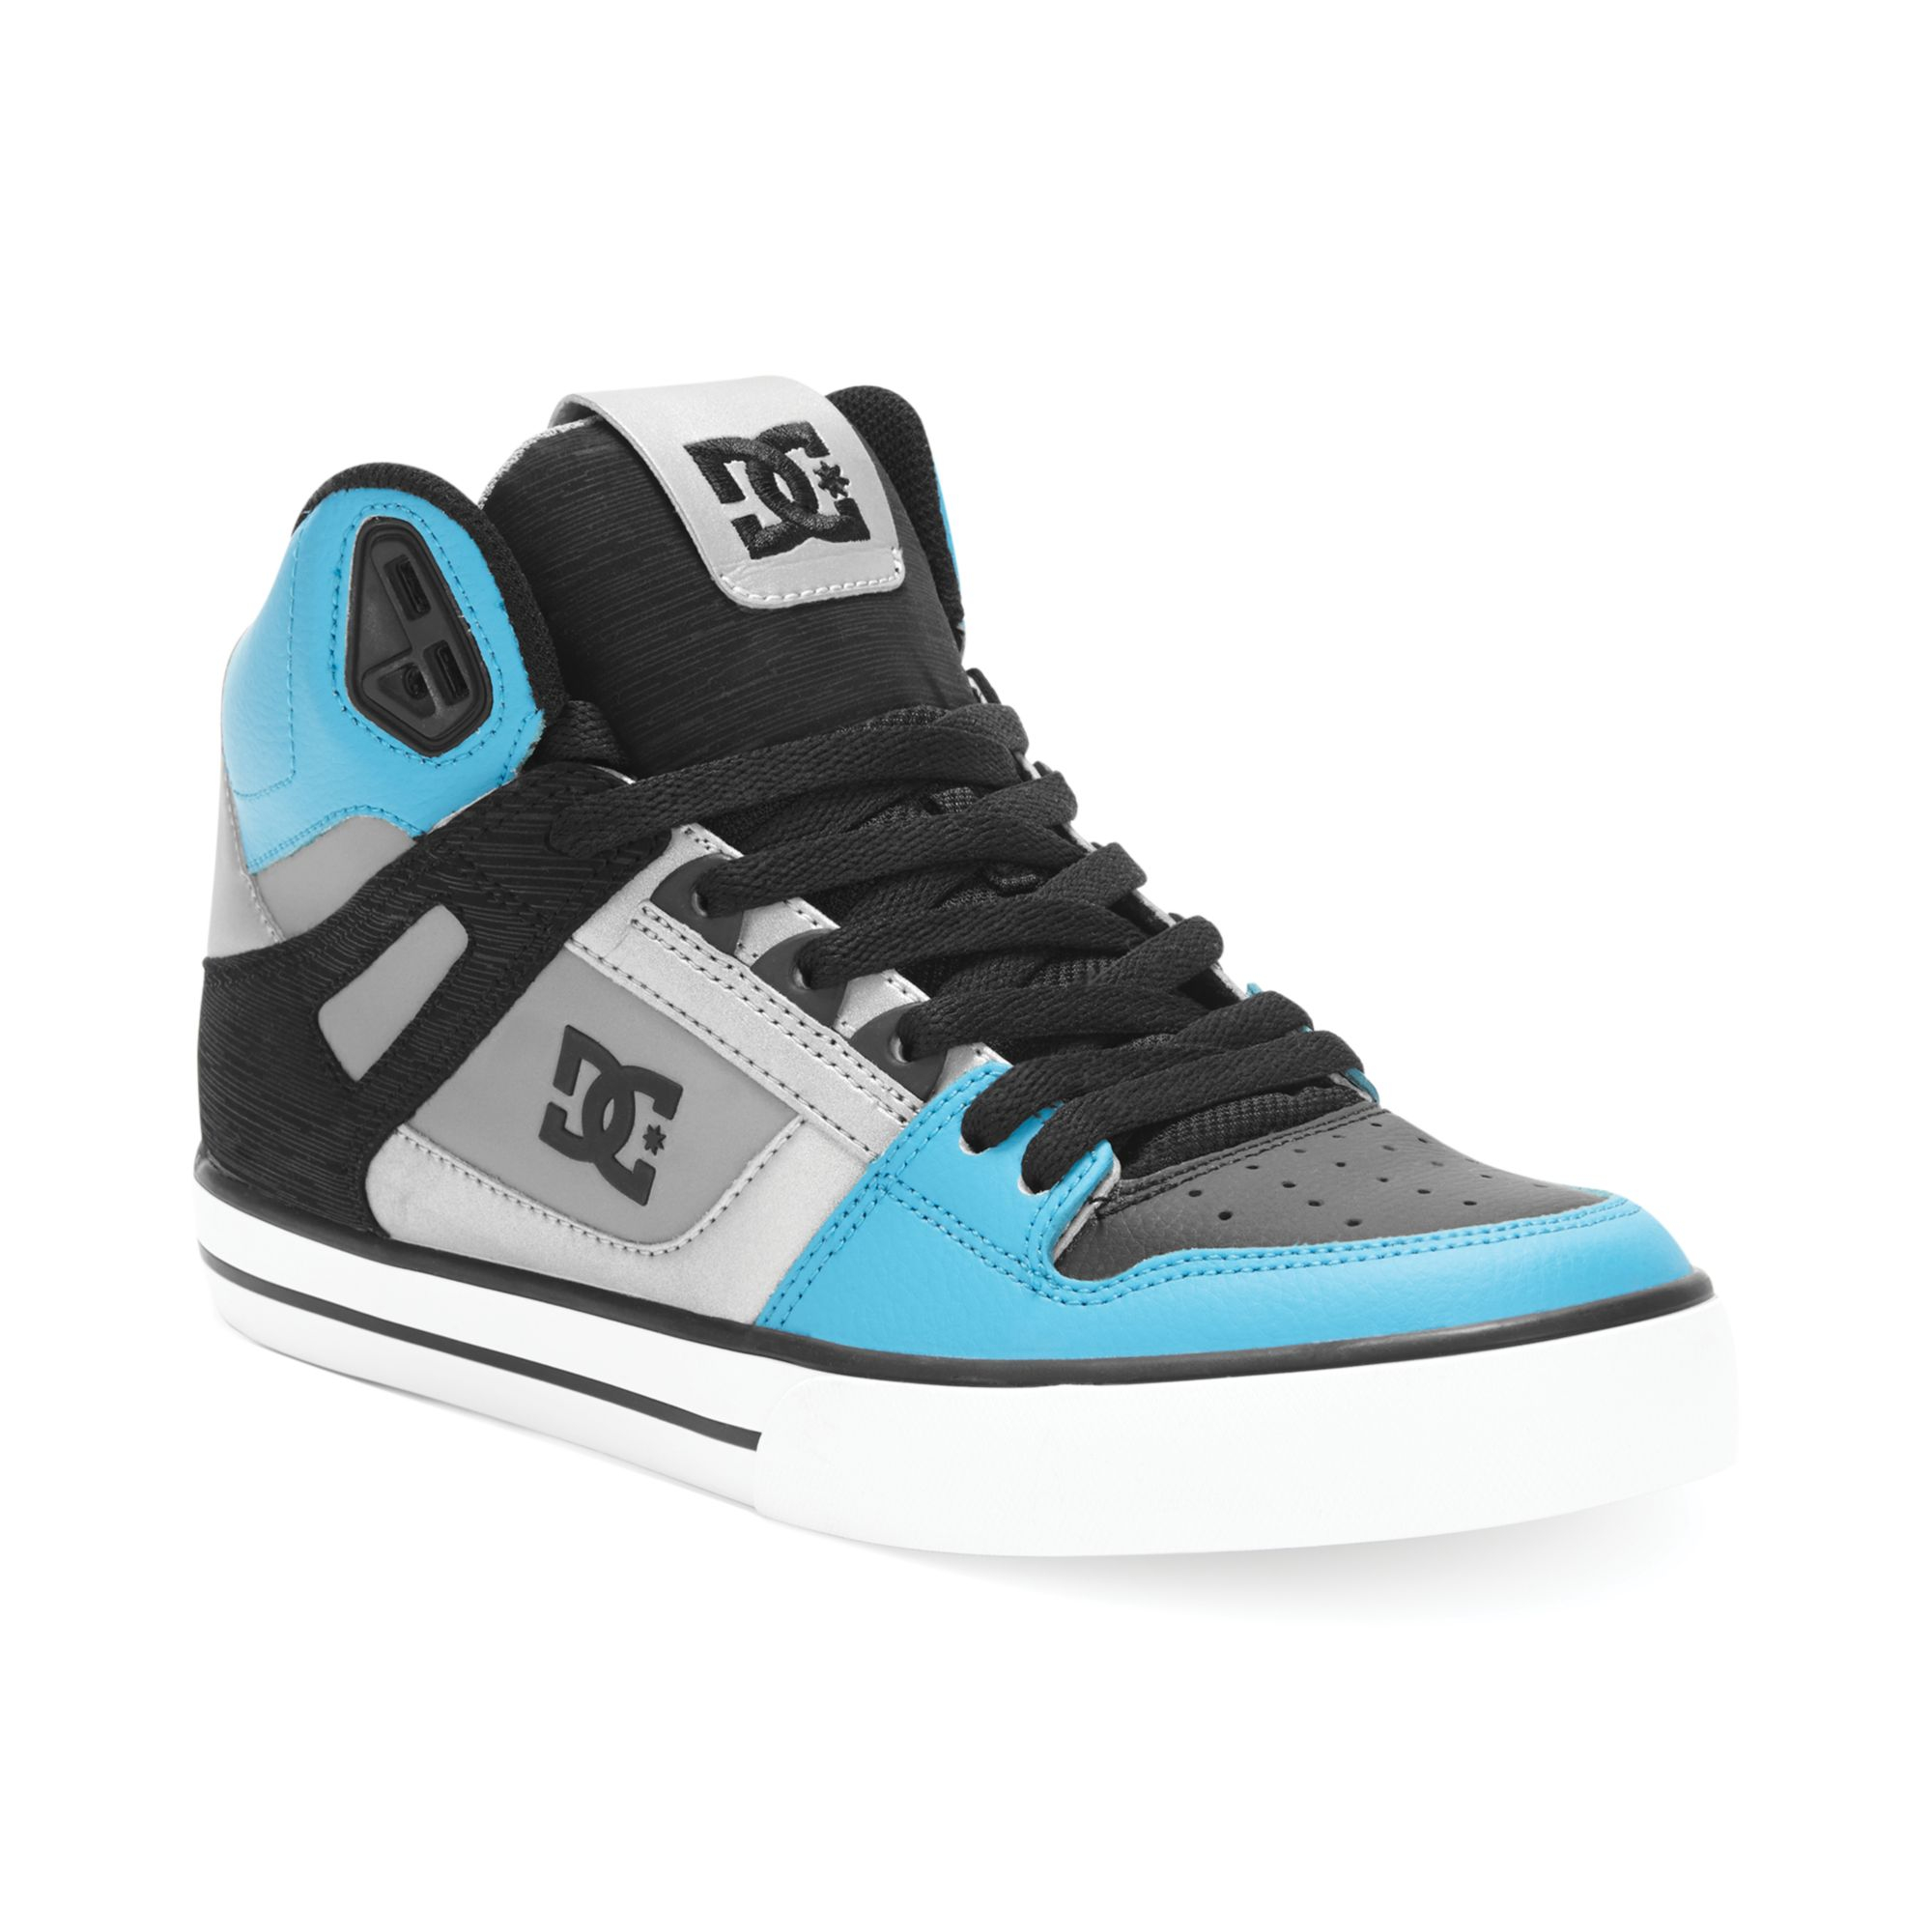 dc shoes blue spartan high wc sneakers product 1 18308261 0 730935743 normal